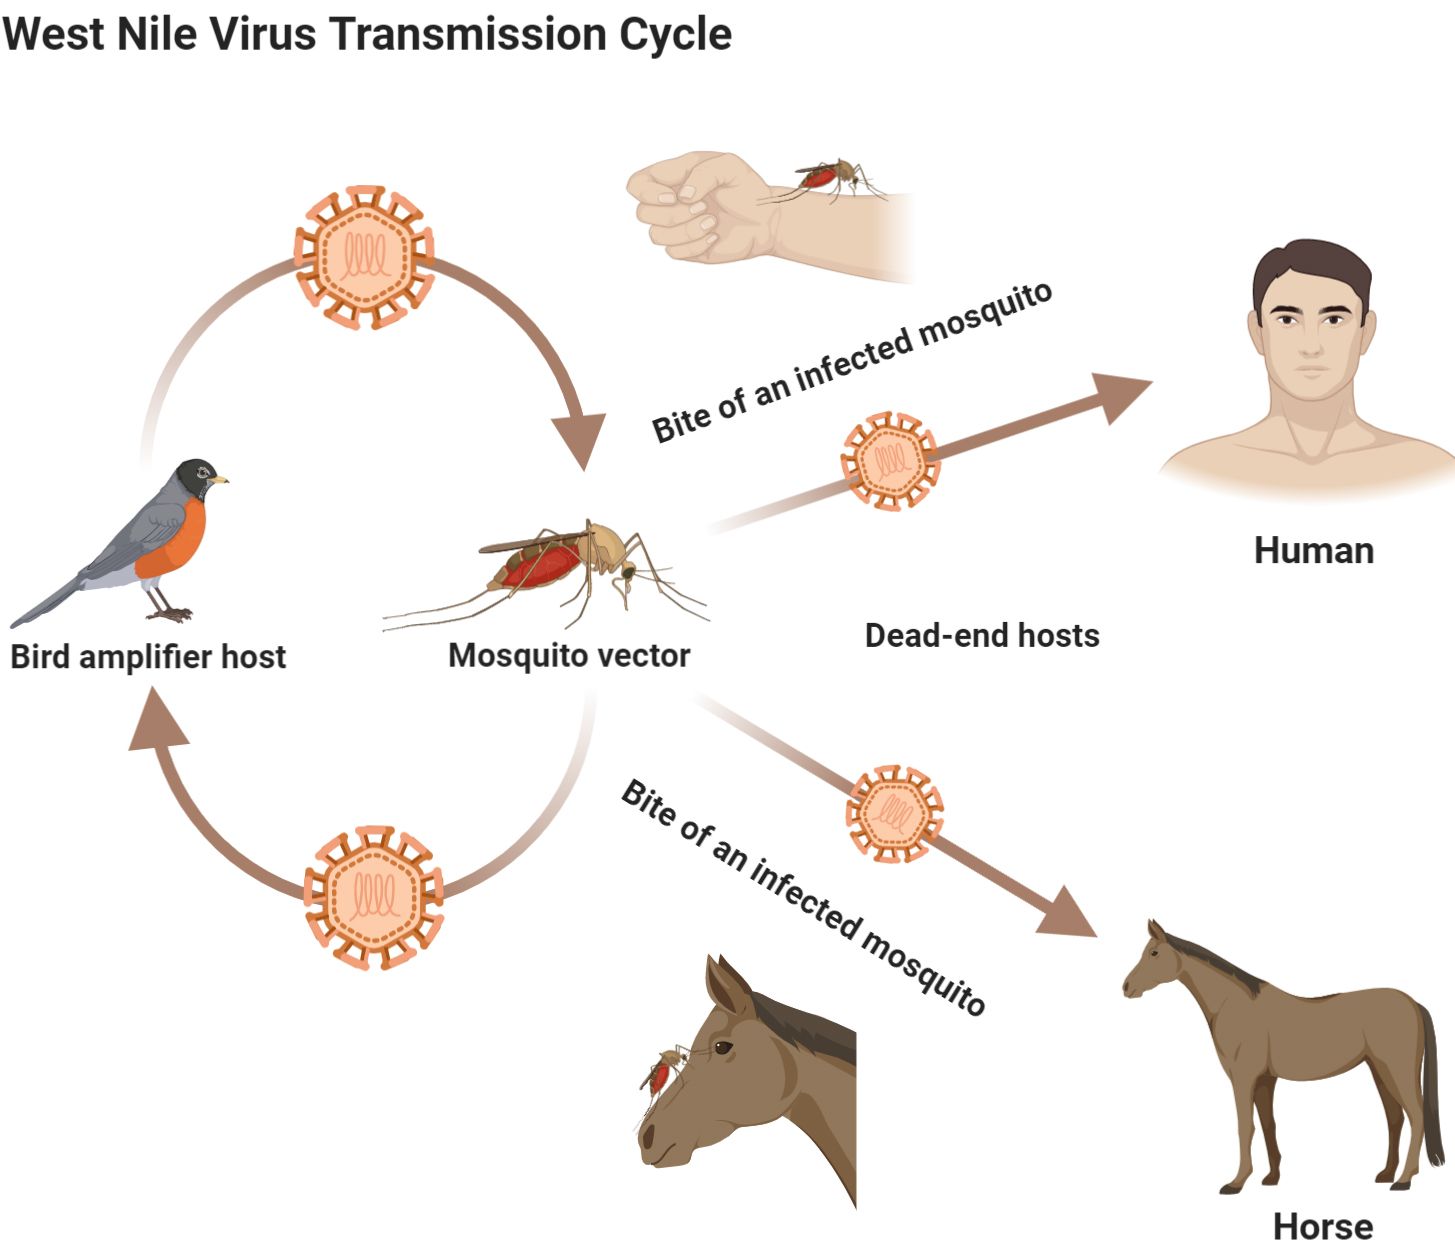 Transmission cycle of West Nile virus, an example of a virus that can be transmitted by Culex pipiens. 